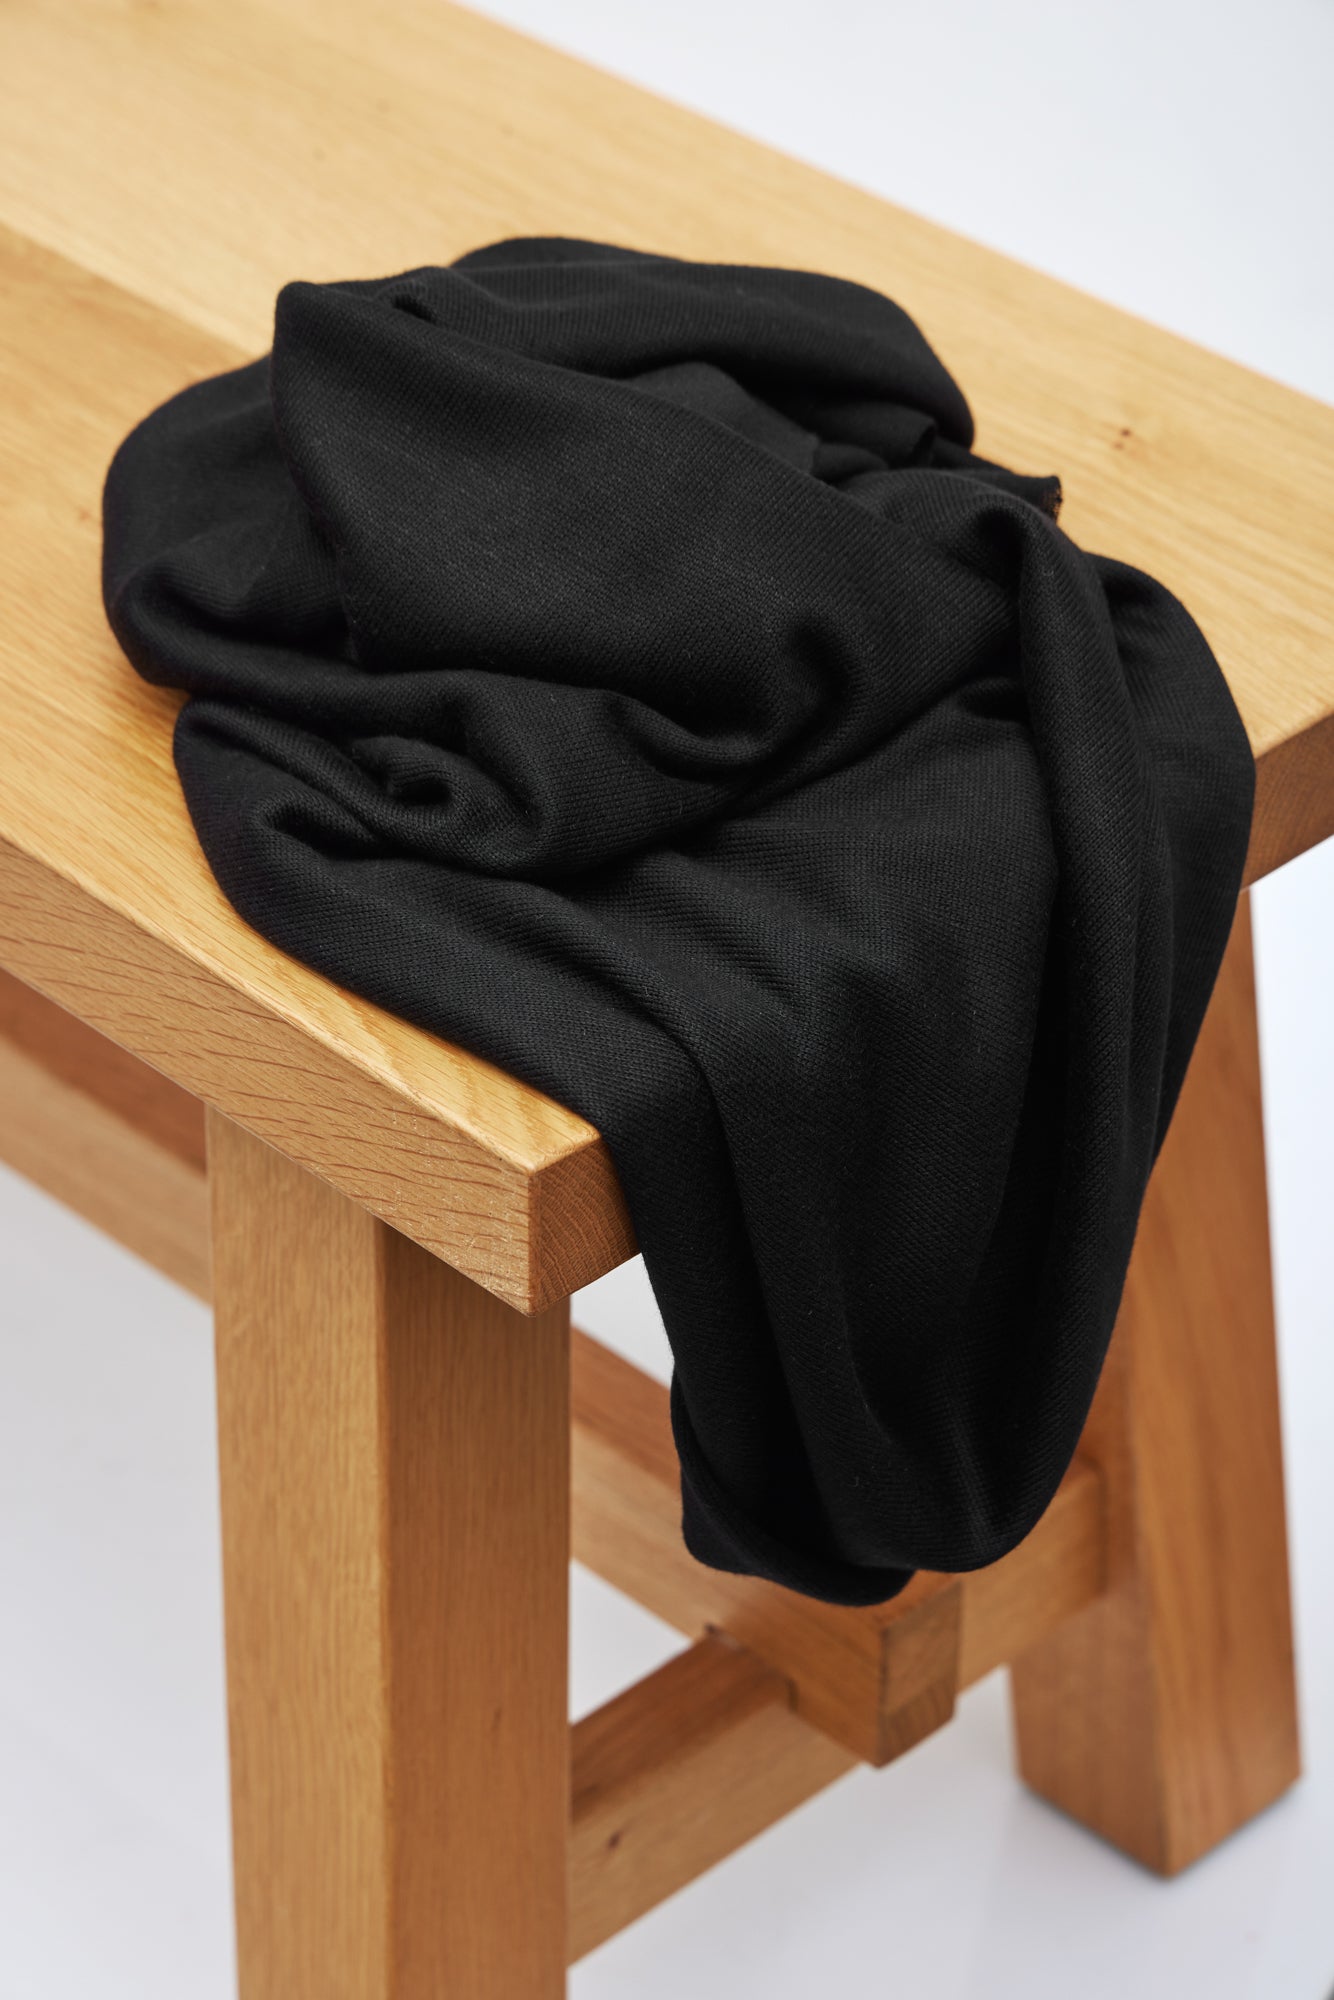 Black Ecovero knit sewing fabric draped over wooden bench